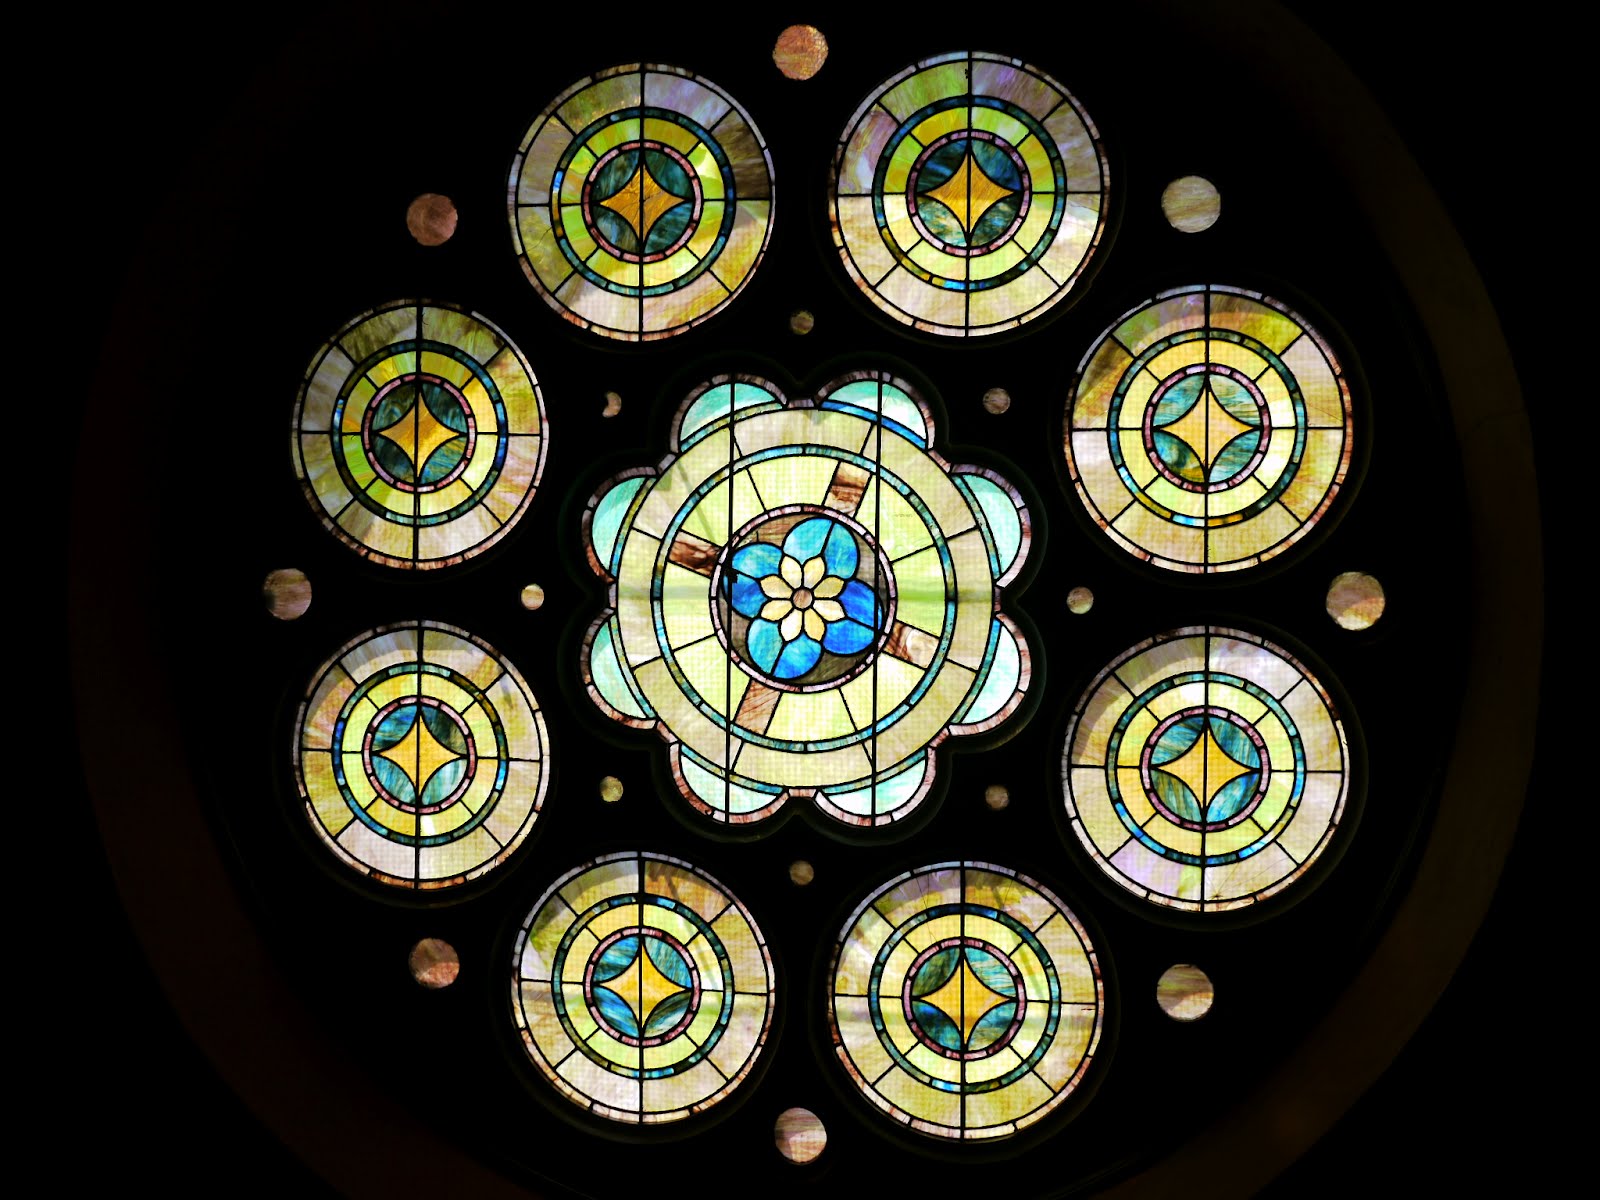 Stained-glass window at the front of the church